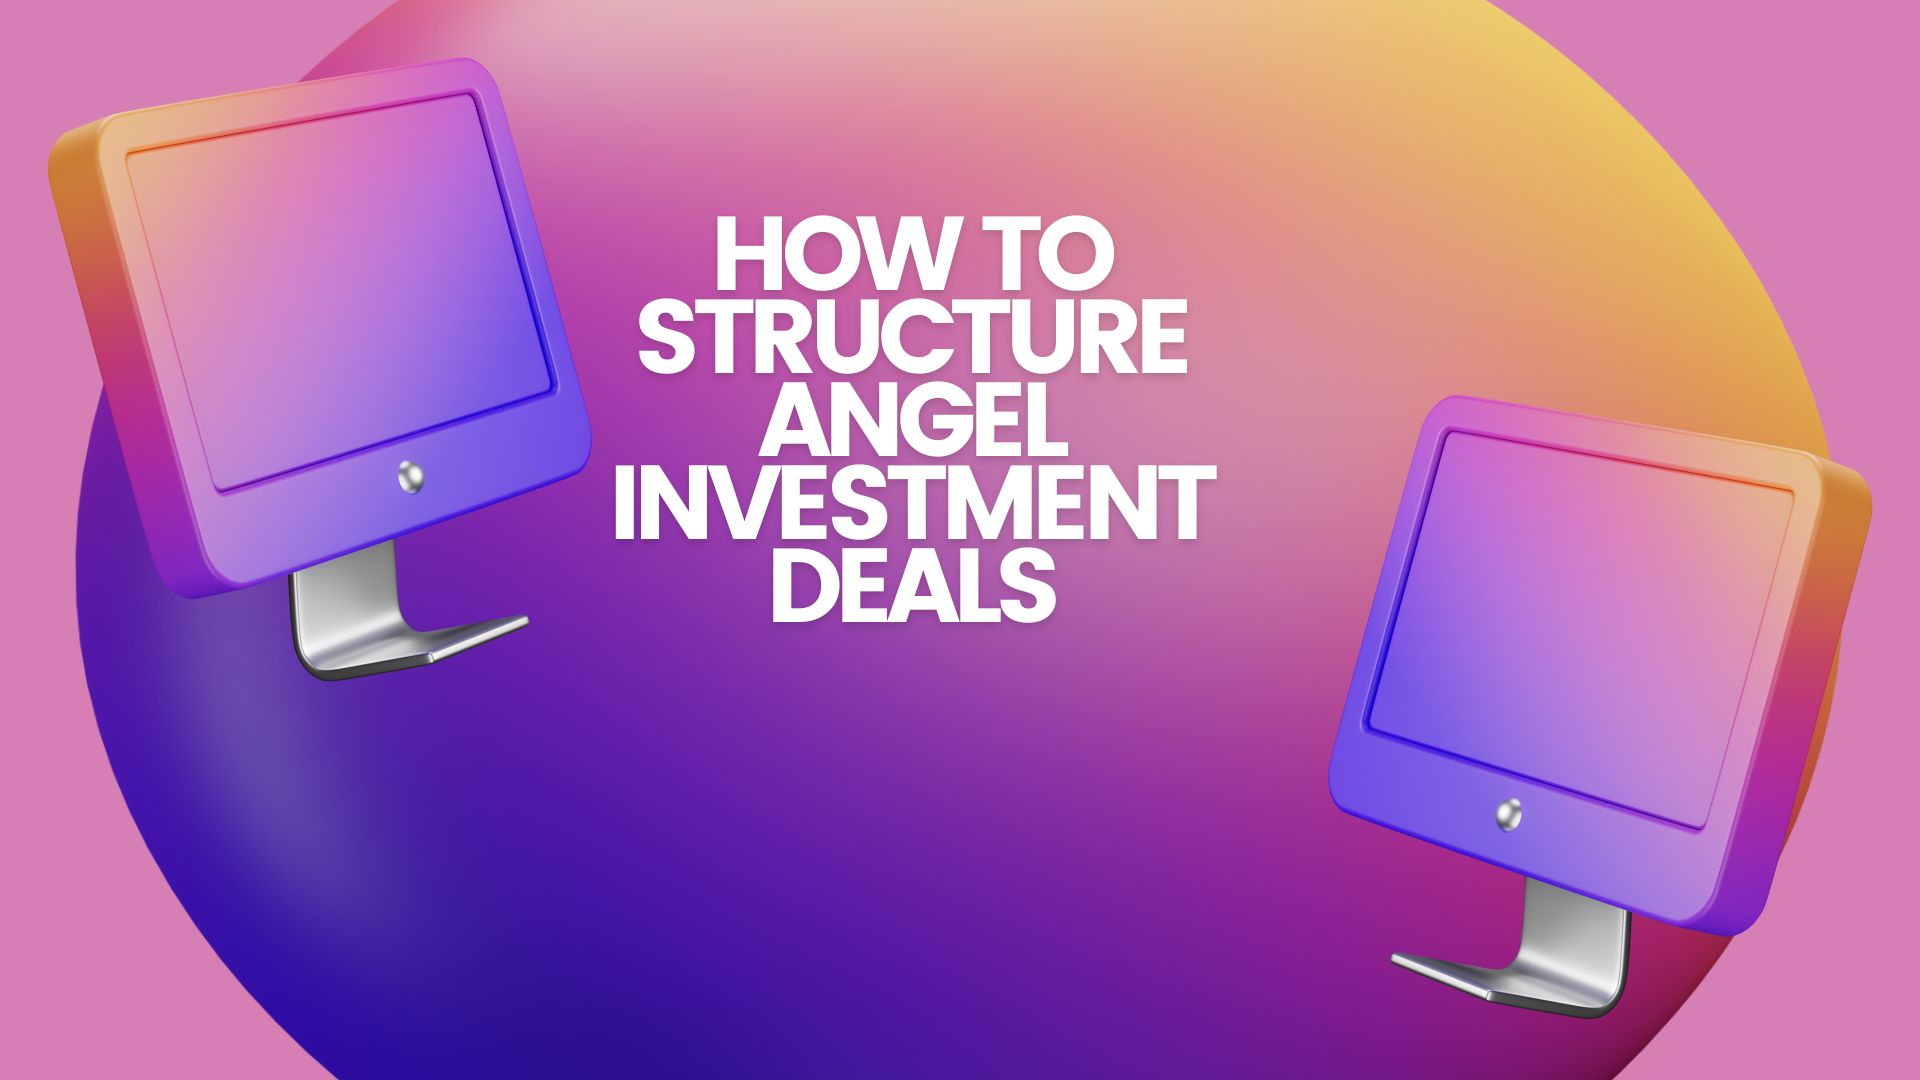 How to Structure Angel Investment Deals